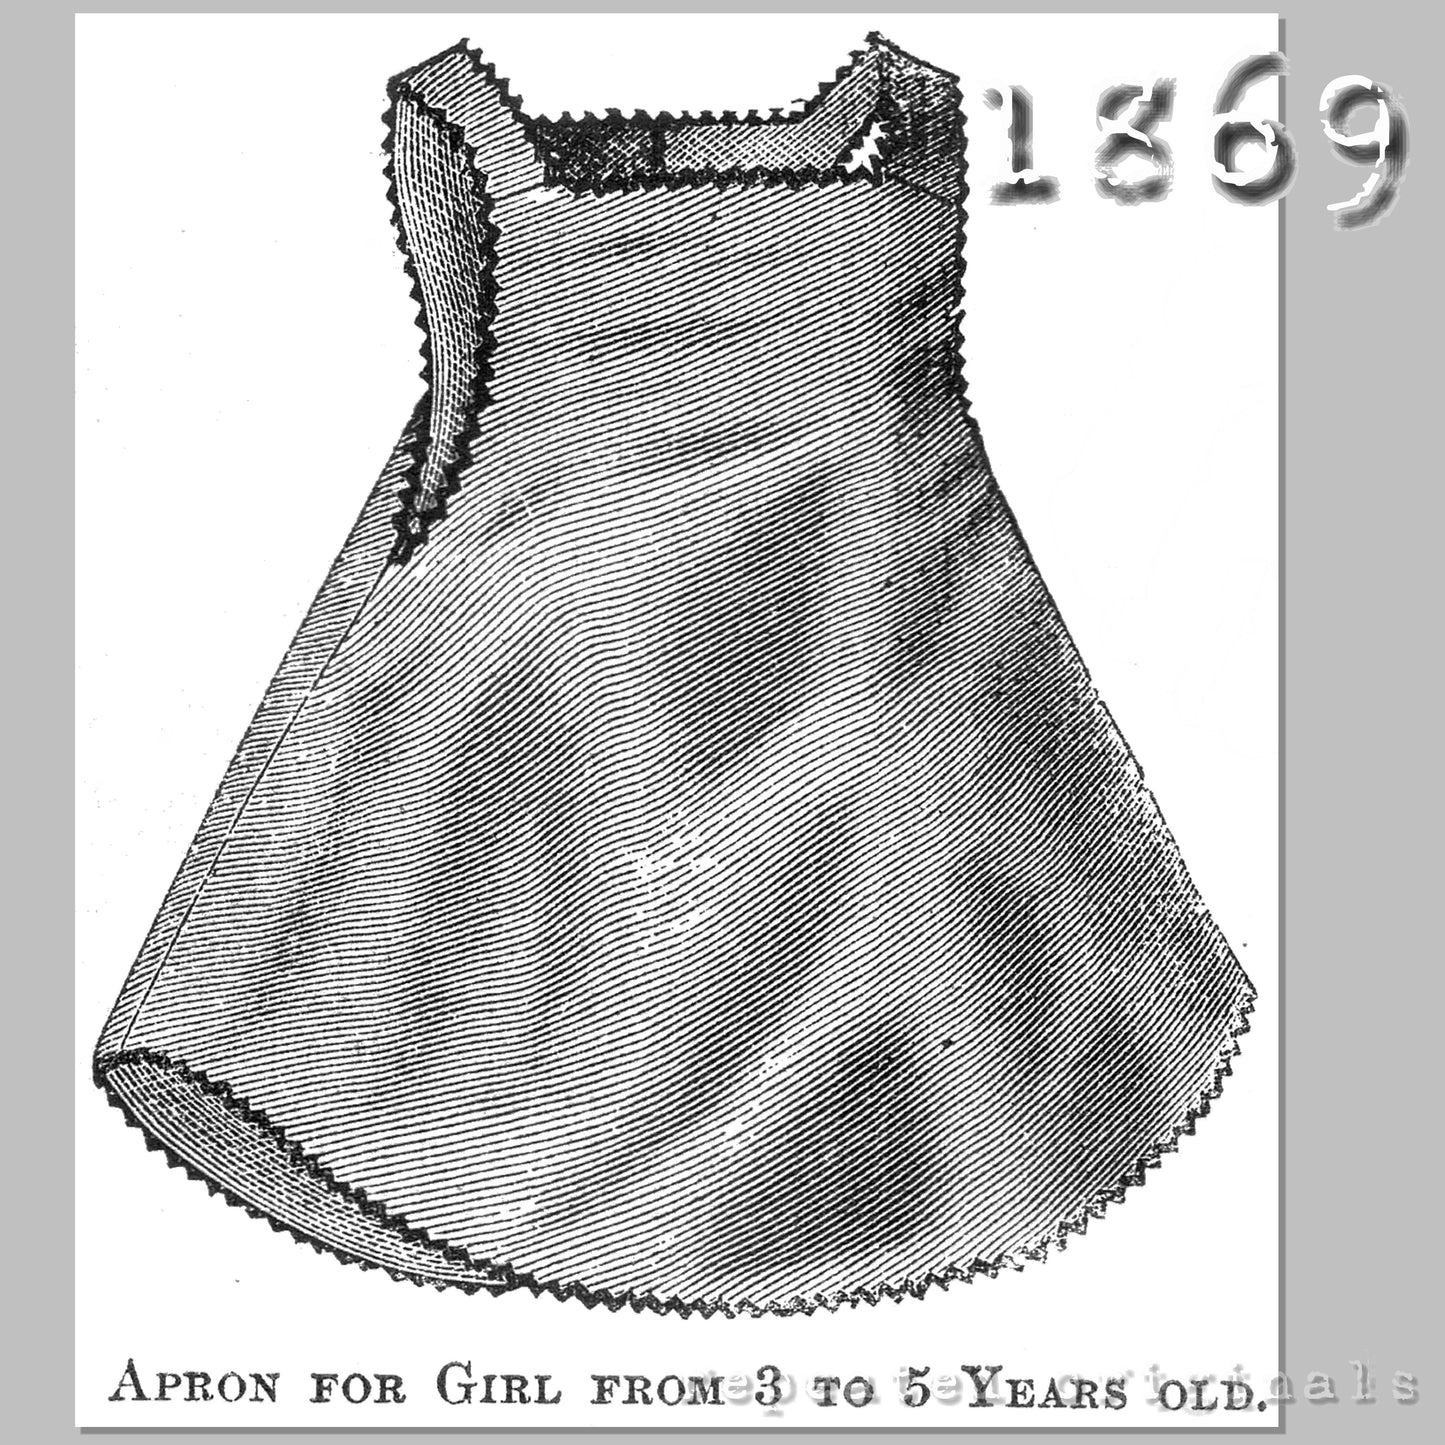 1869 Apron for Girl 3 to 5 Years Sewing Pattern - INSTANT DOWNLOAD PDF